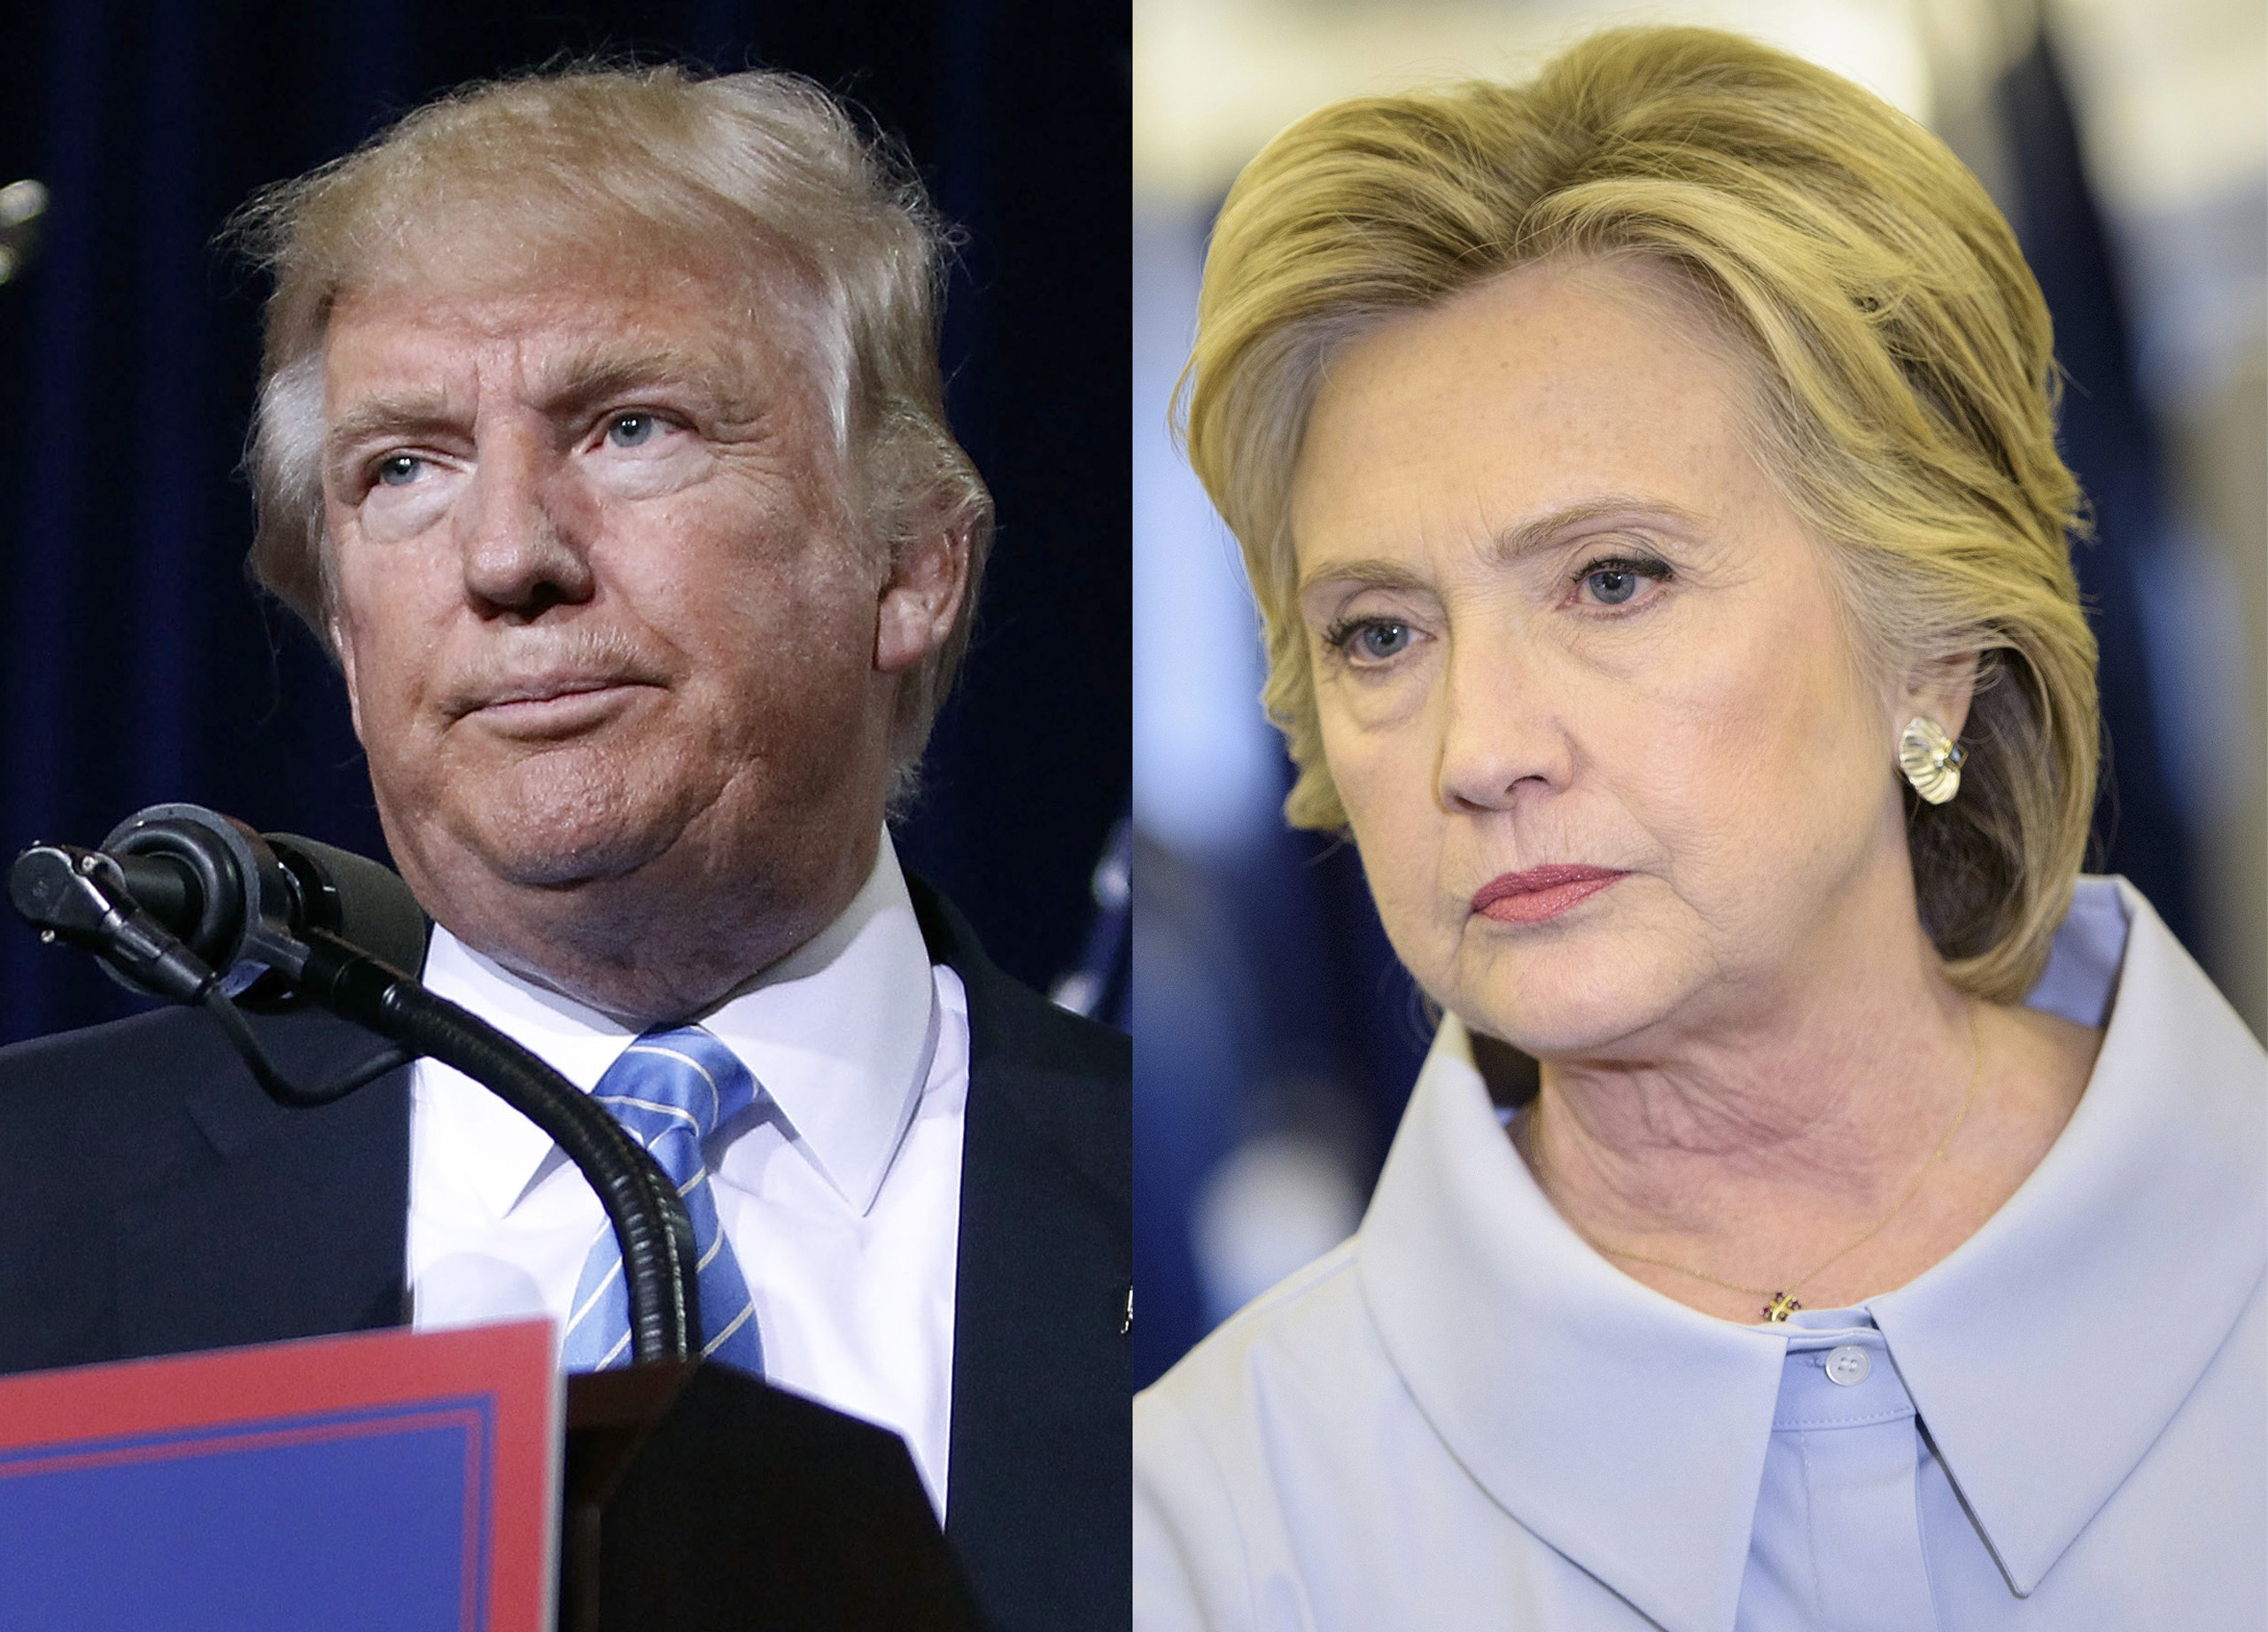 Republican Presidential Nominee Donald Trump, left and Democratic Presidential Nominee Hillary Clinton. (Getty Images)